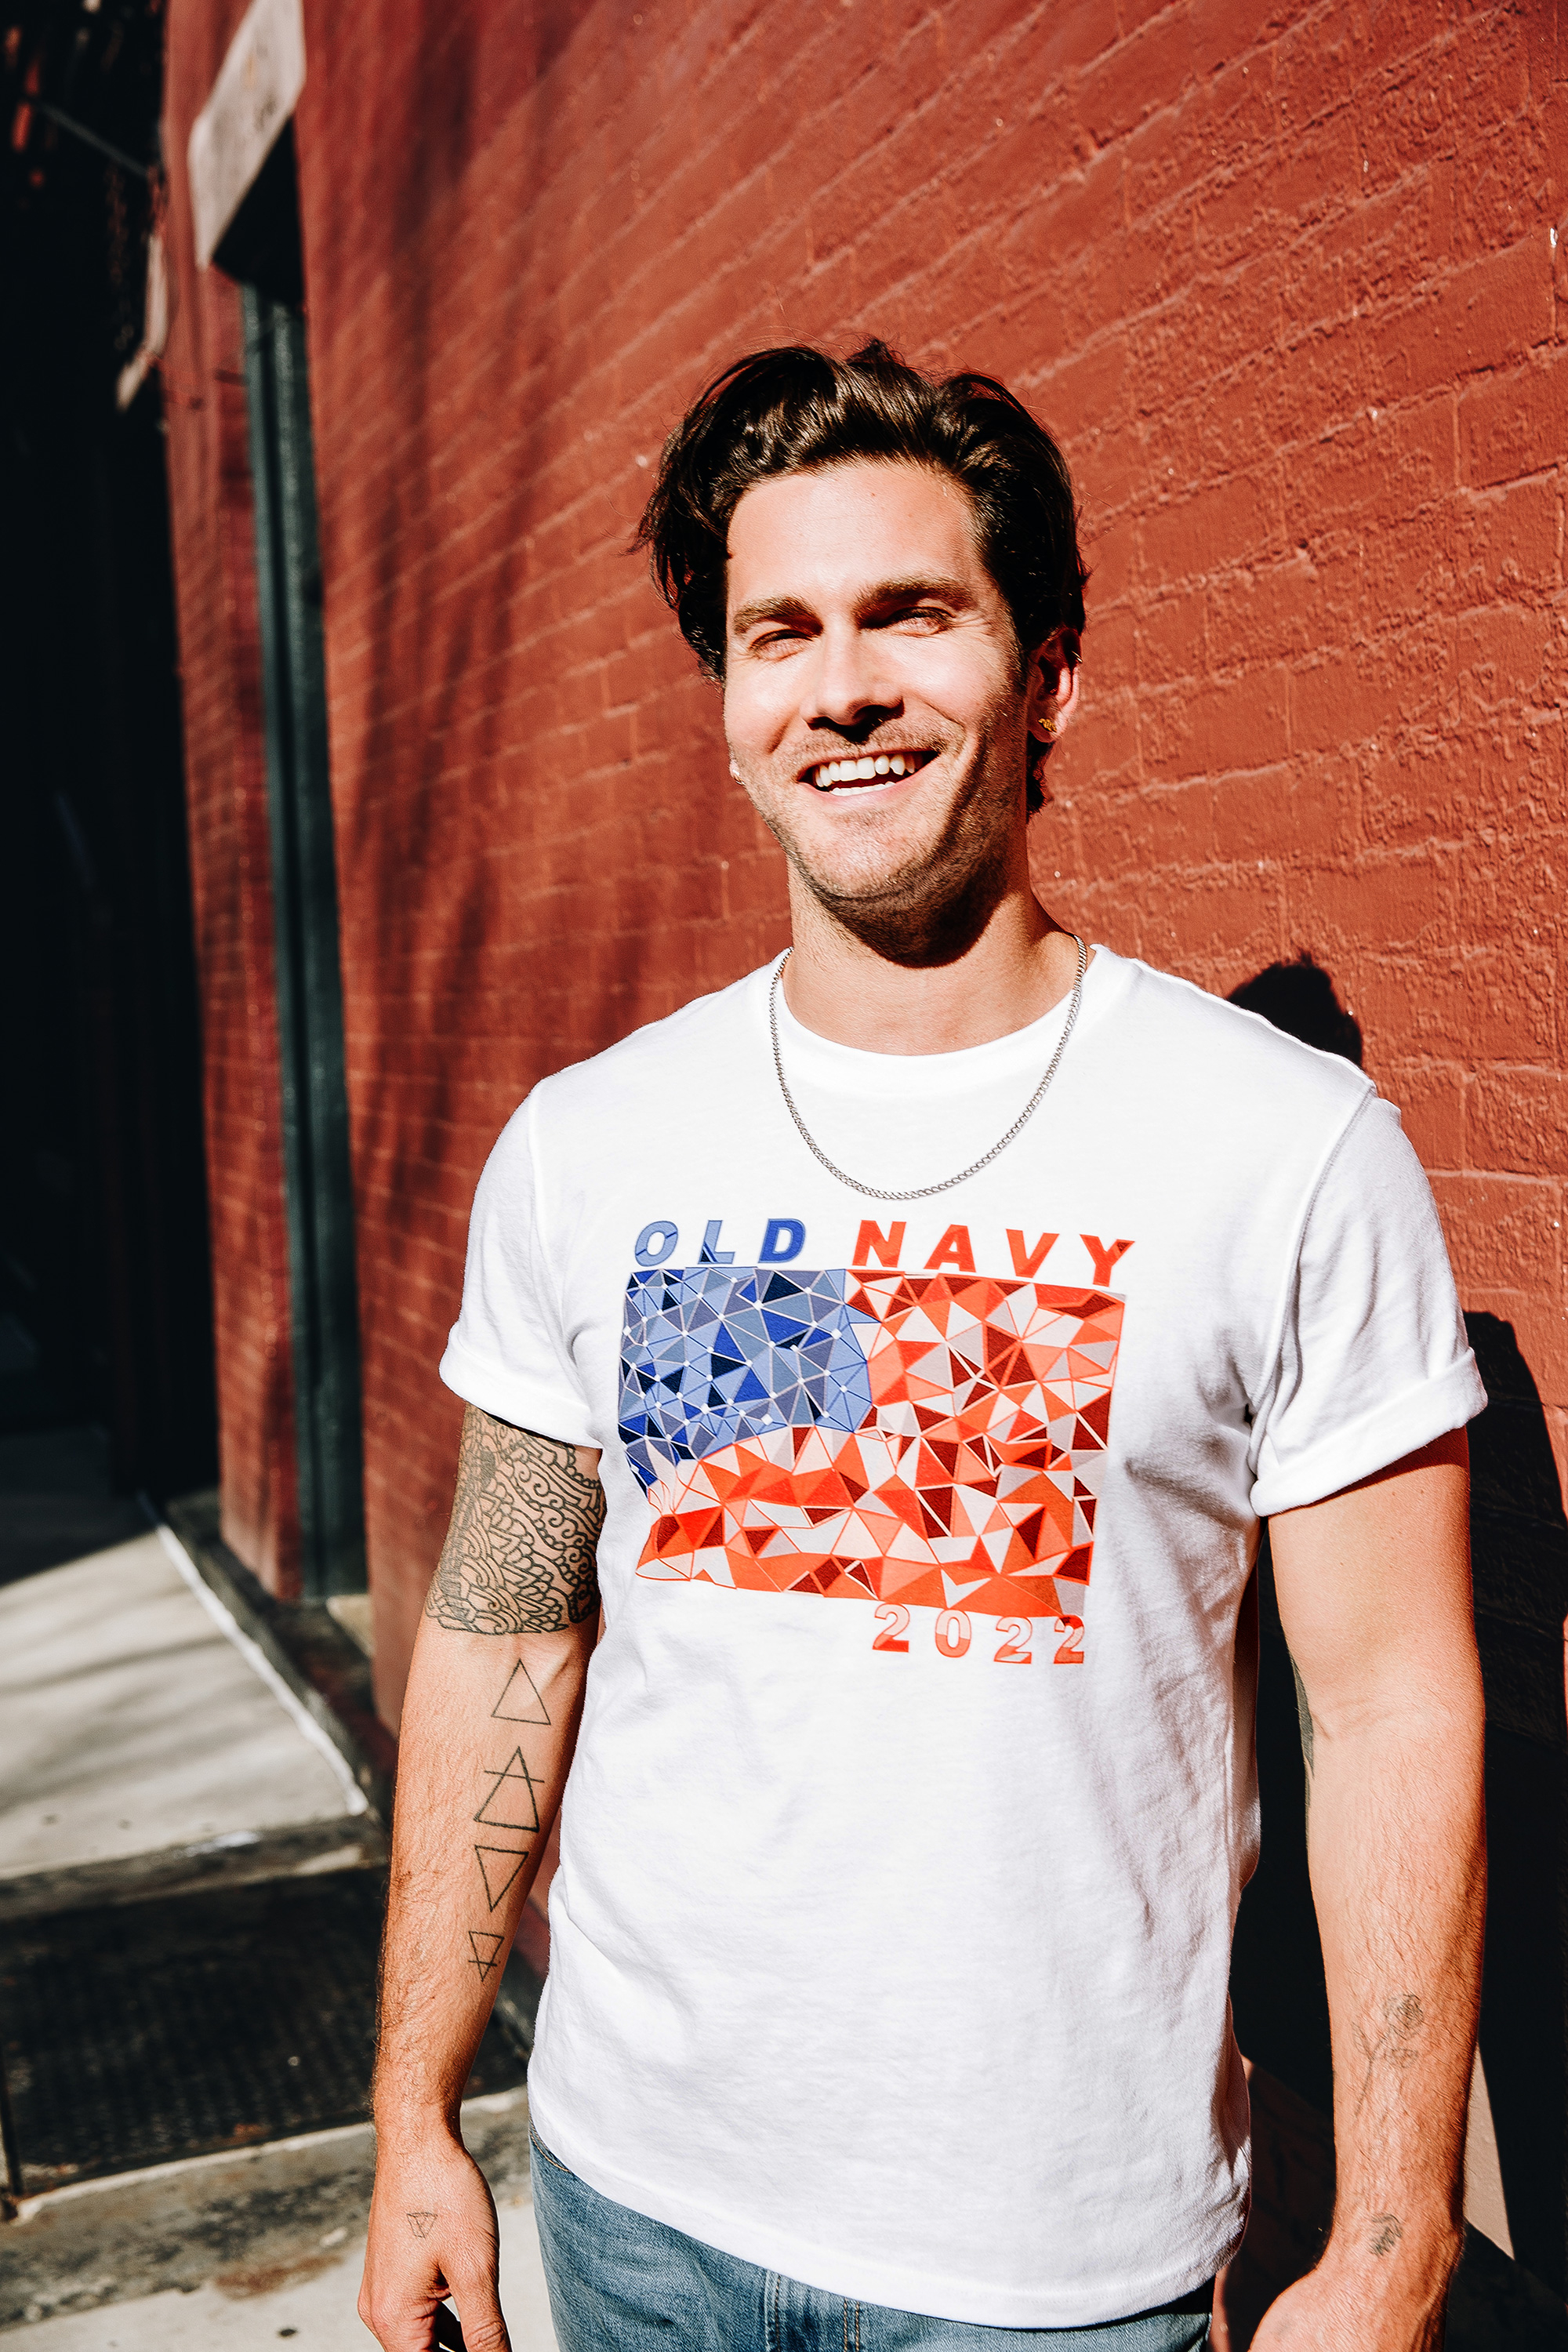 Old Navy Broadens Representation this Fourth of July with Expanded